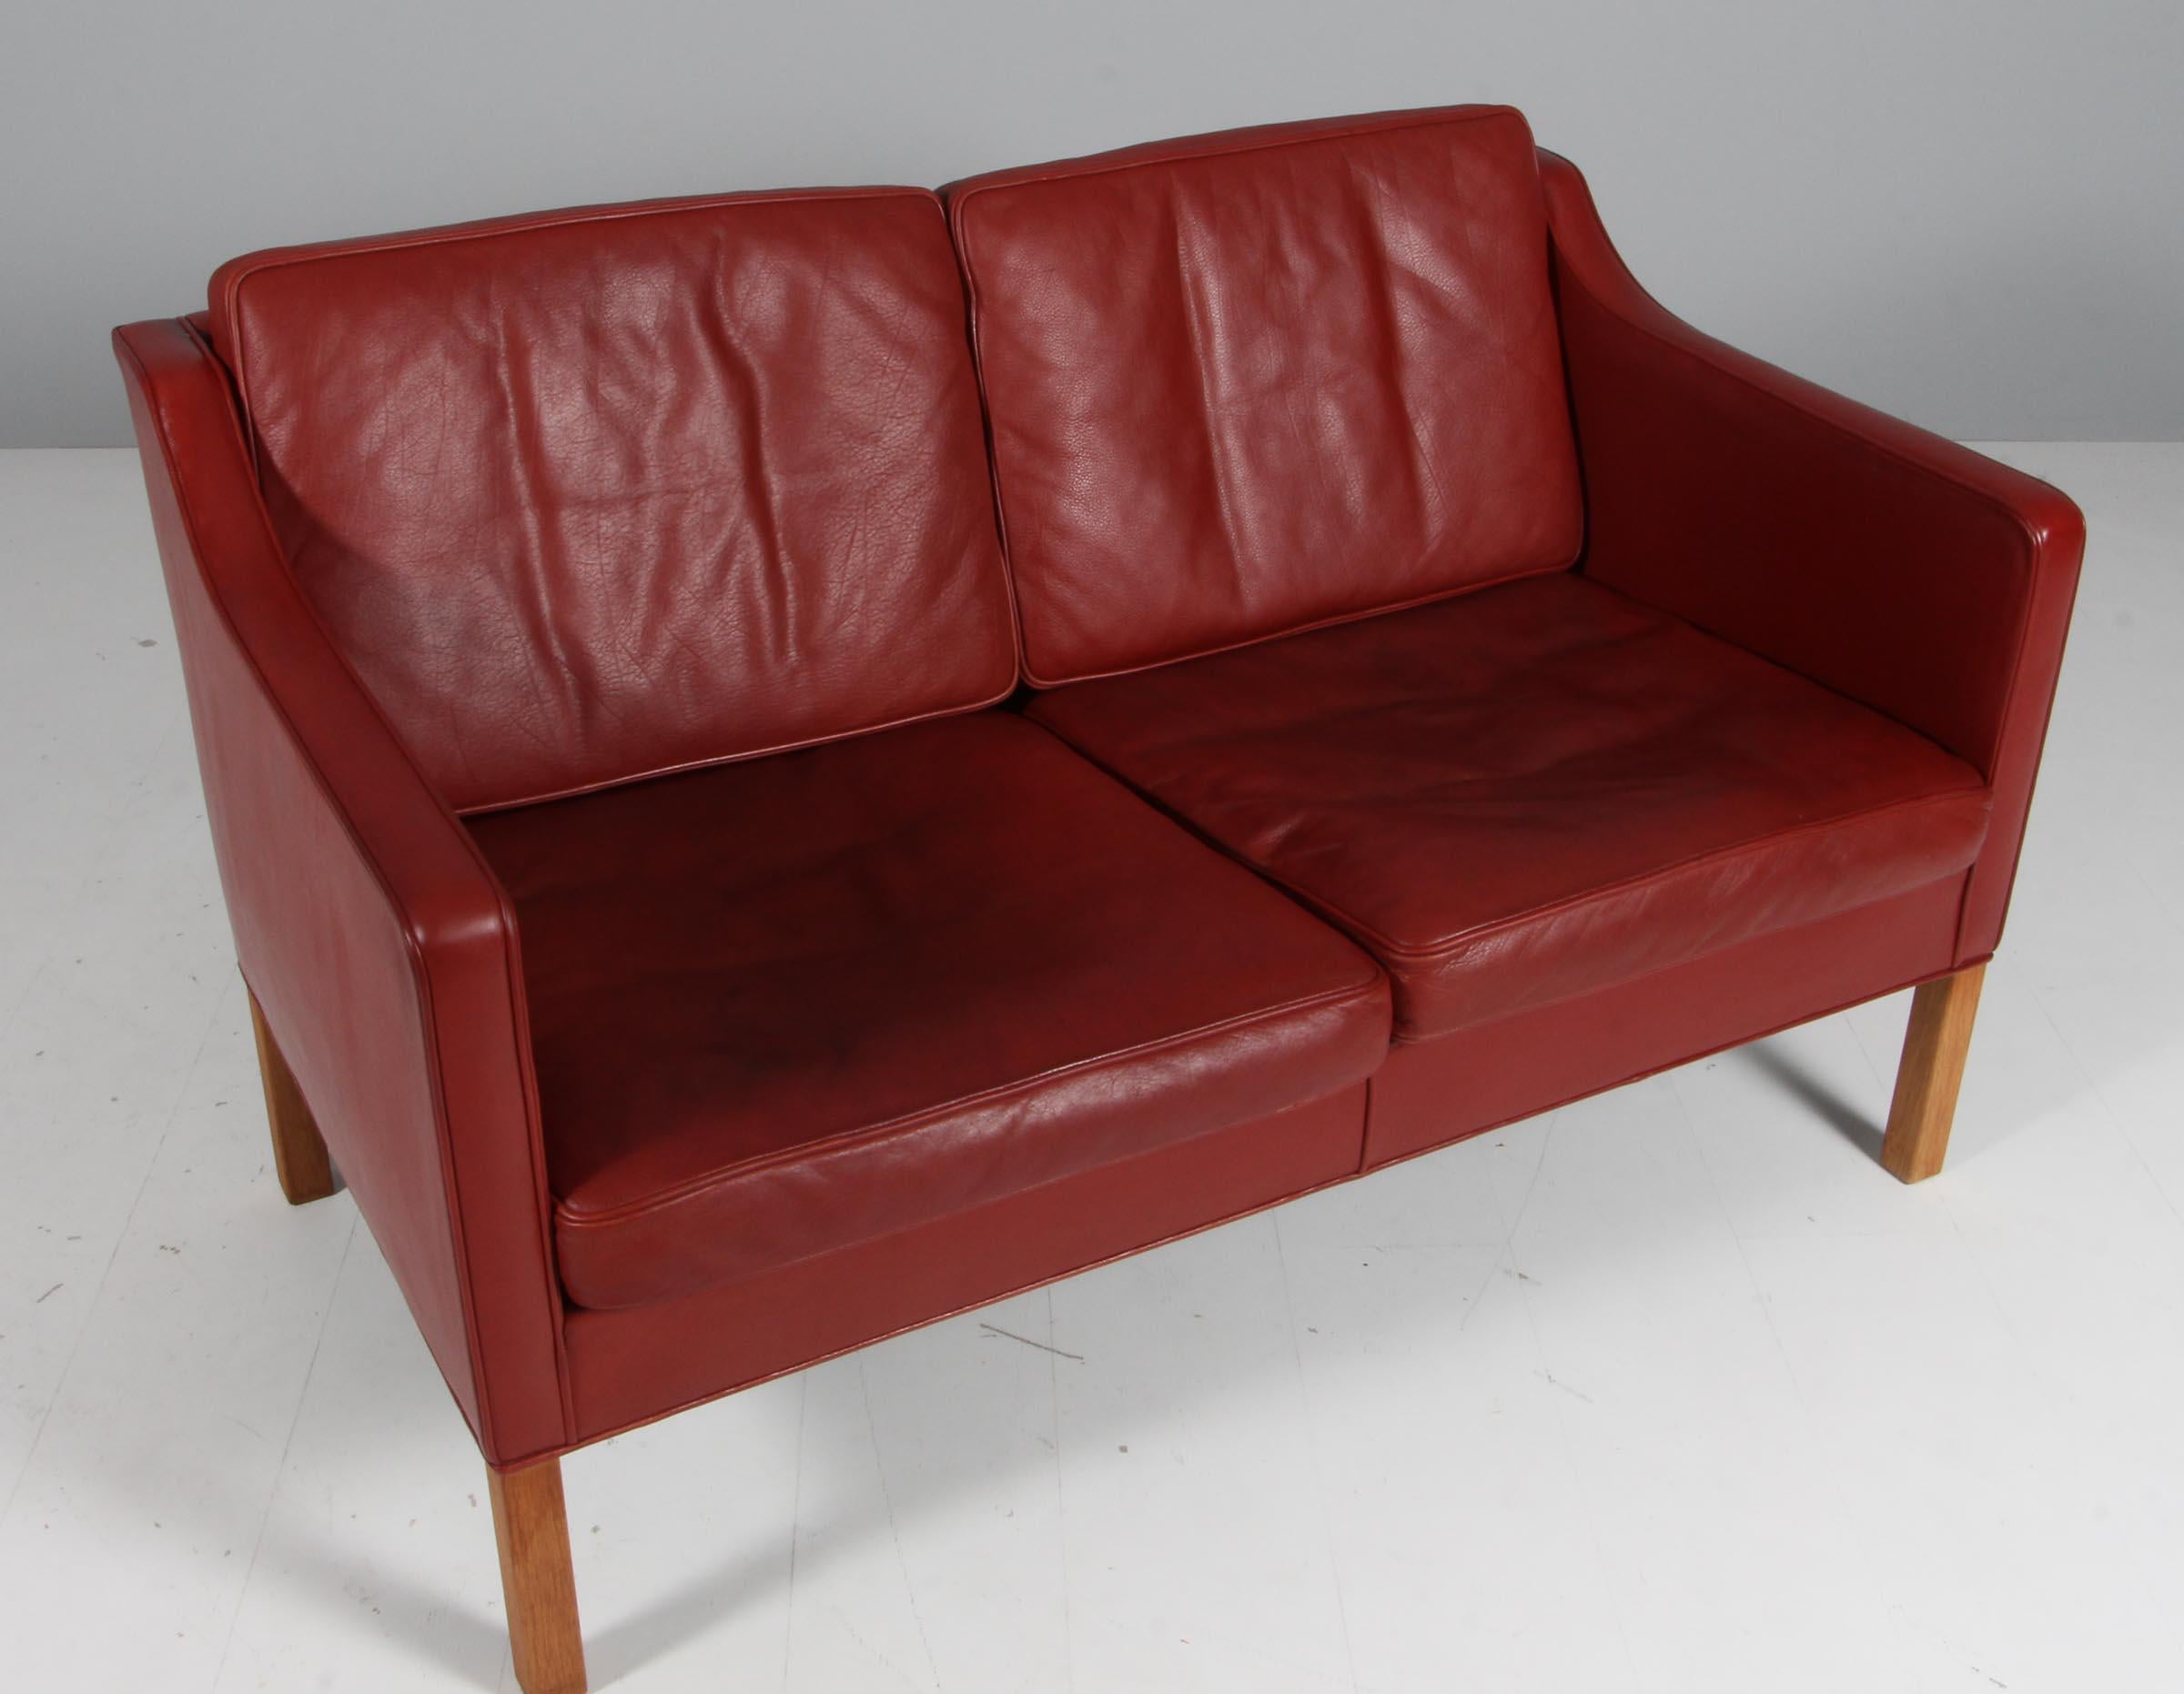 Børge Mogensen two-seat sofa original upholstered with red/brown leather.

Legs of oak.

Model 2322, made by Fredericia Furniture.